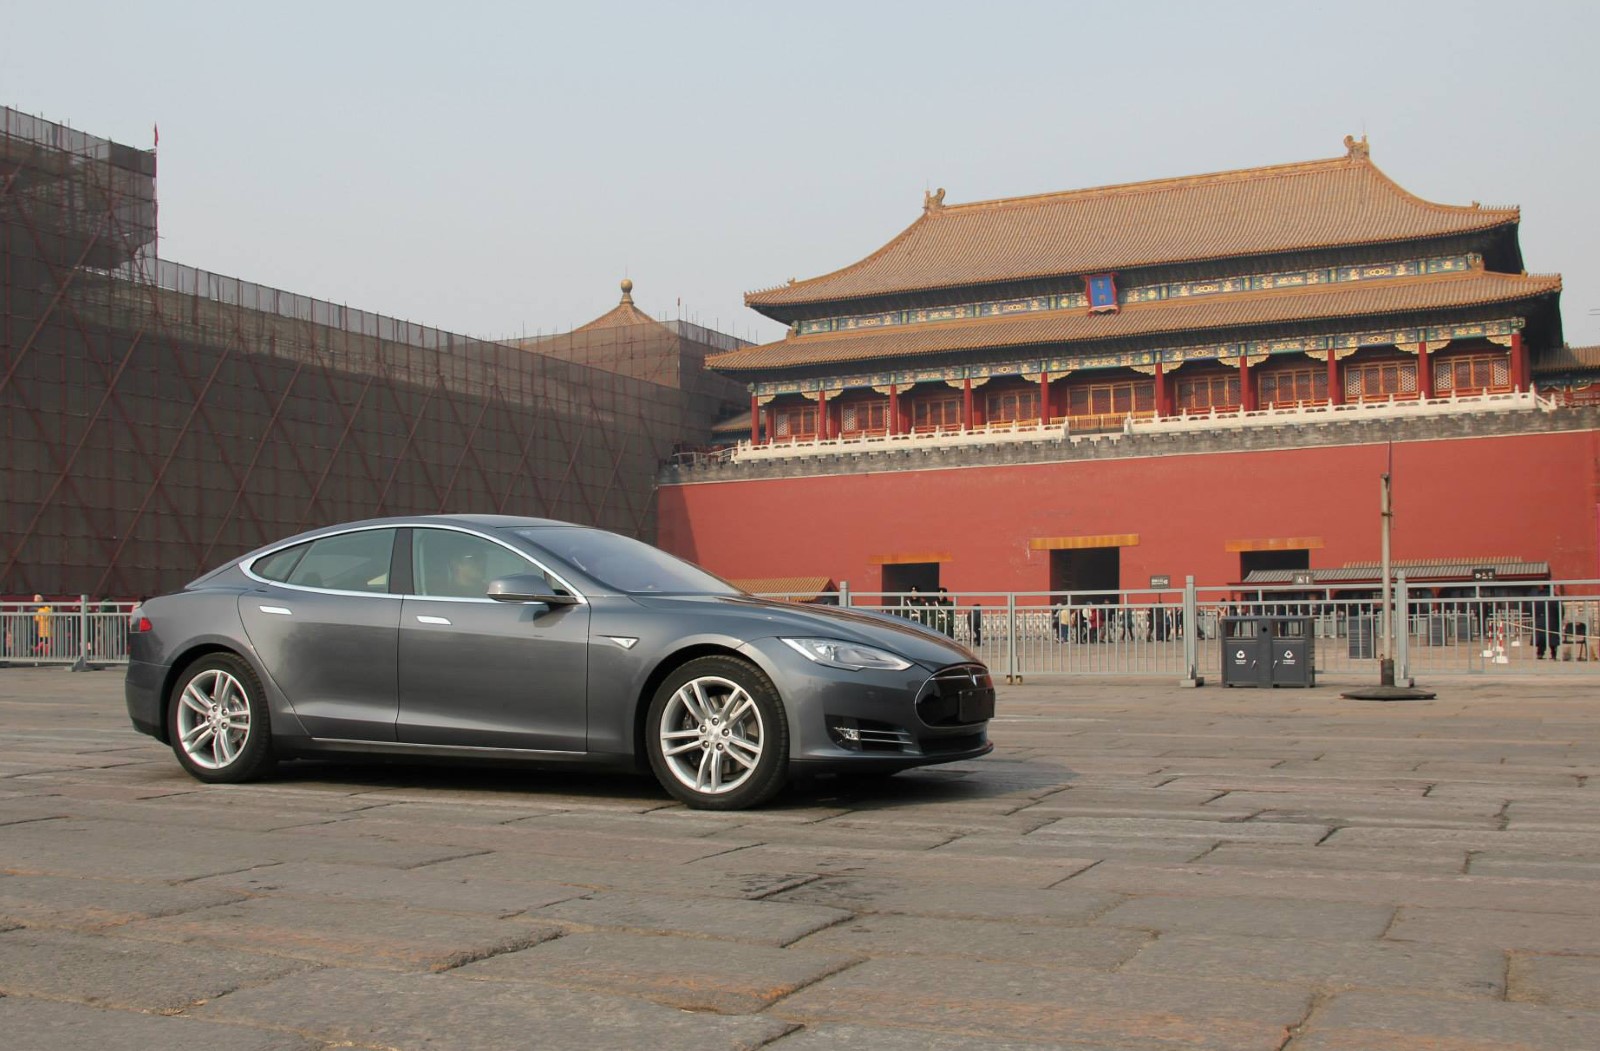 Beijing Doubles Electric Car Quota, May Sweeten with Free Parking